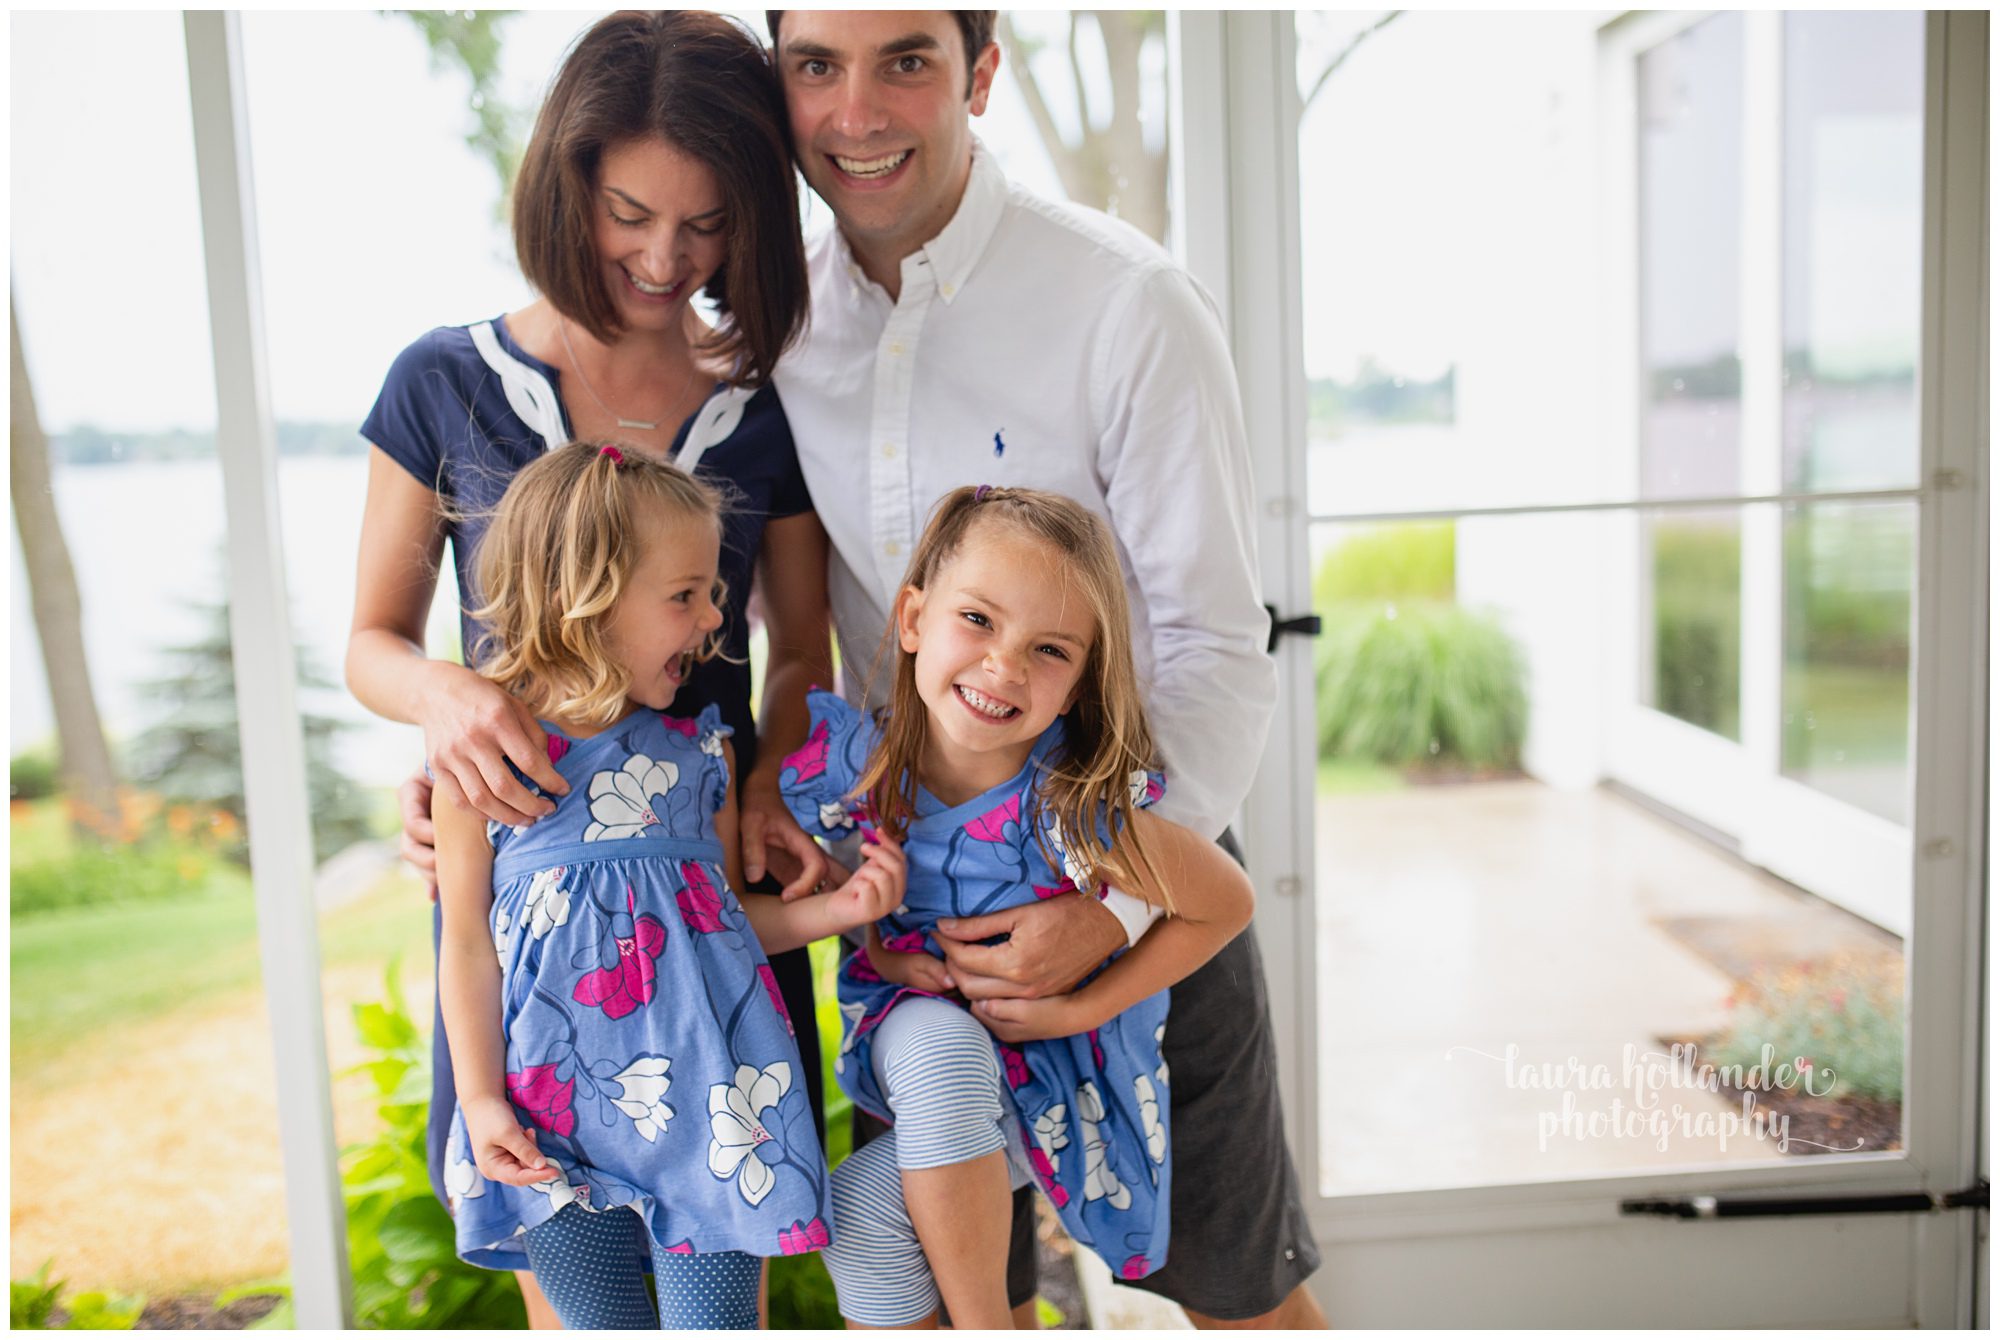 mother and two daughters, lifestyle photography, Laura Hollander Photography